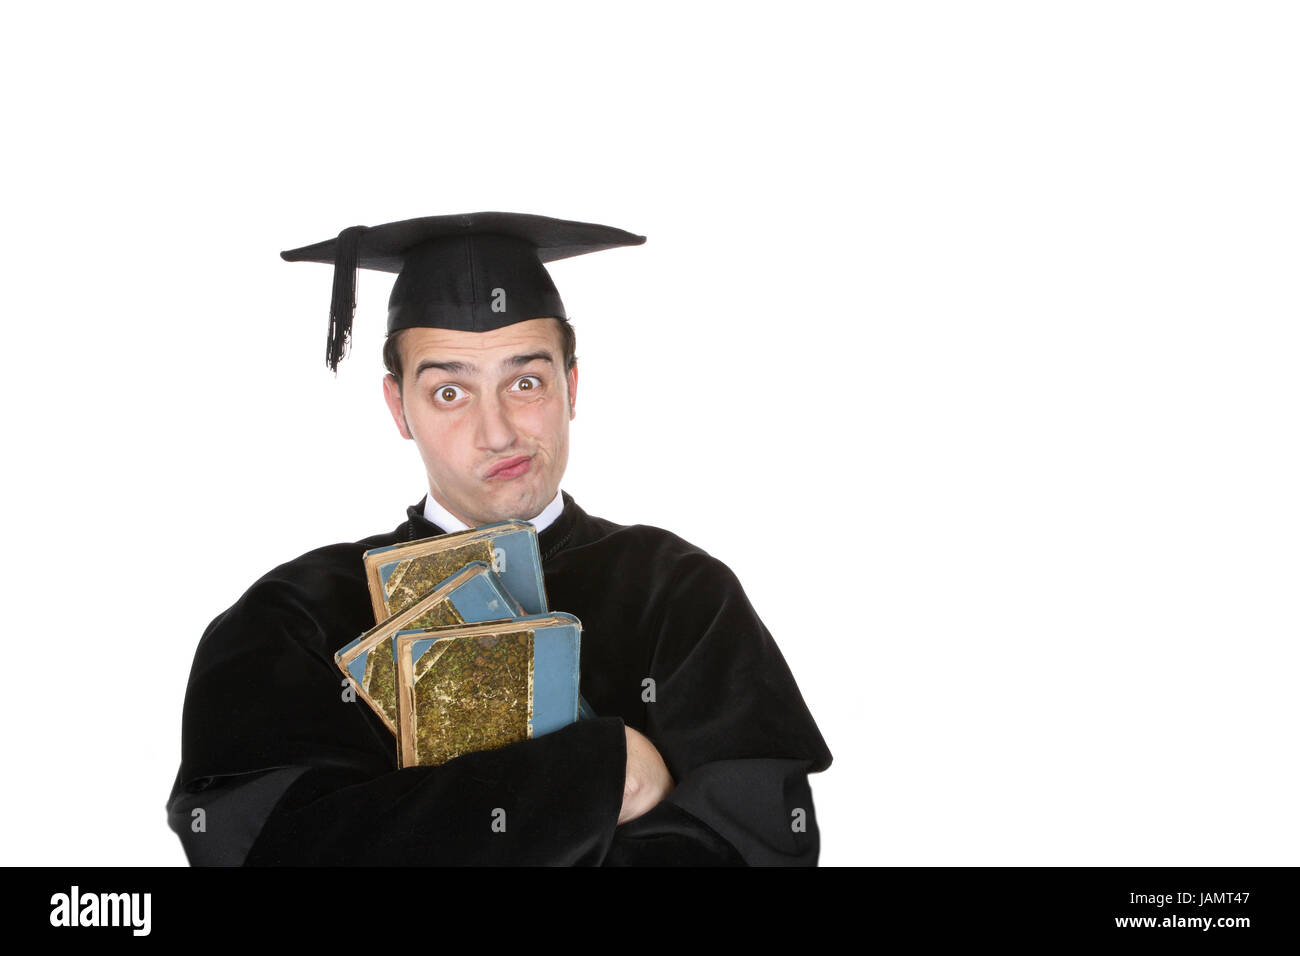 Student,doctoral cap,cassock,books hold,disbelieving,half portrait,only,conclusion,graduate,education,education,view camera,college student,success,ambition,interrogatorily,copy square,college,university graduate,intelligence,young,headgear,learn,reading,literature,man,person,cap,Mortarboard,facial play,pessimistically,do a doctorate,court dress,study,study,student,studio,uncertainly,undecided,knowledge,thirst for knowledge,dissatisfied,future,doubt, Stock Photo